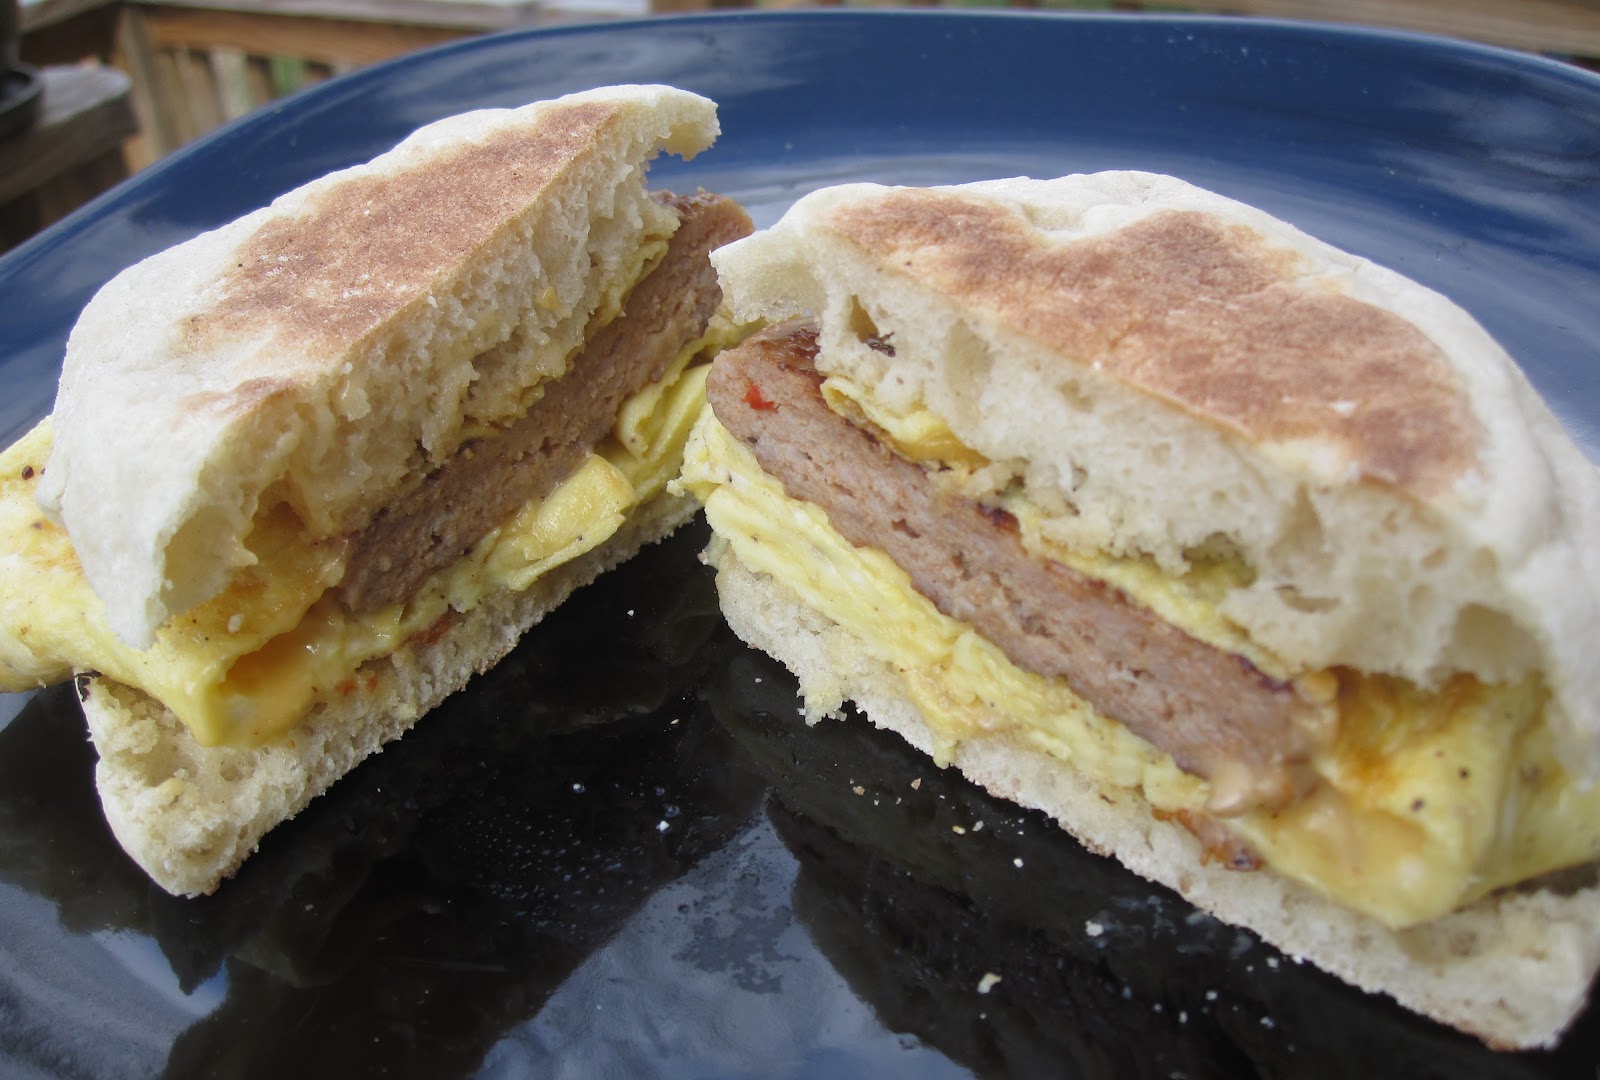 Sausage, Egg and Cheese Sandwich